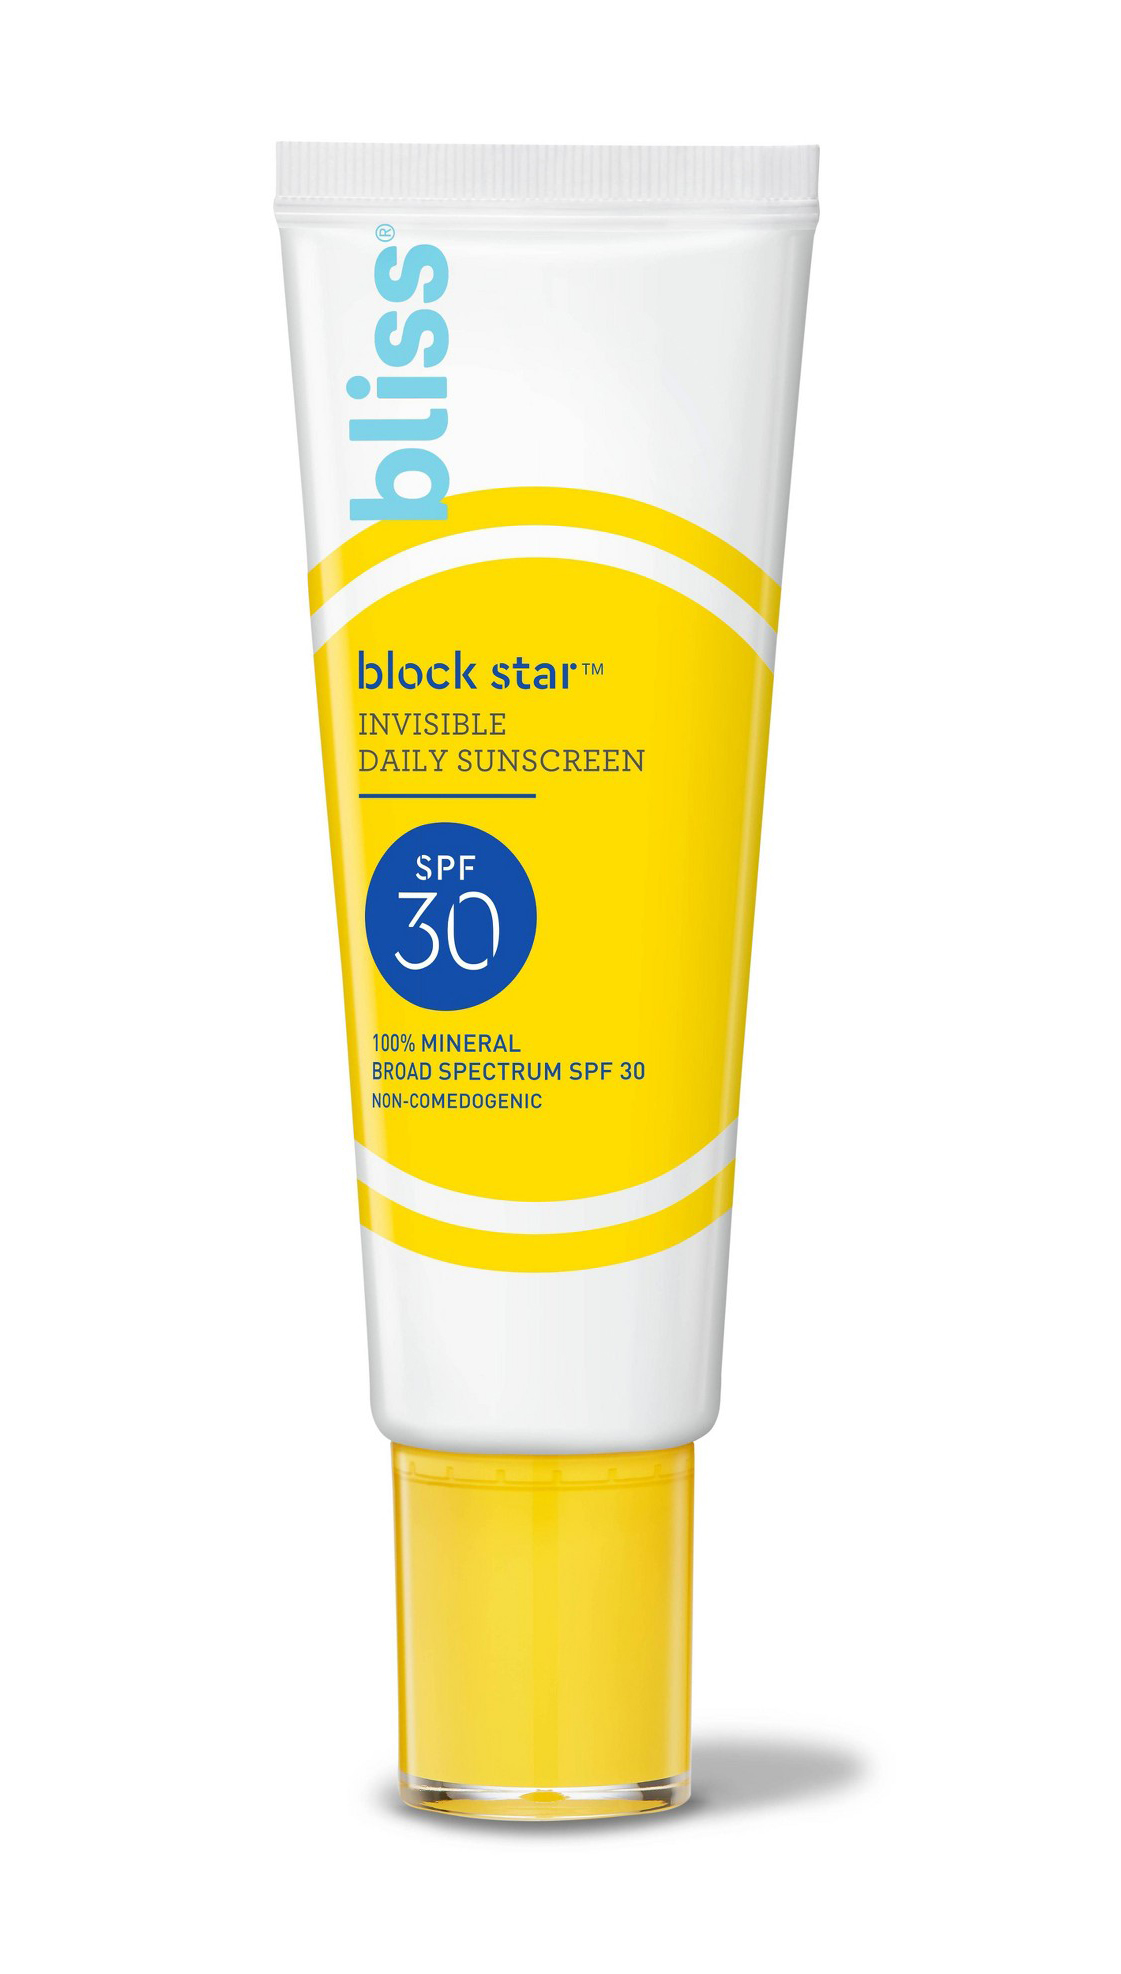 bliss Block Star Daily Mineral Sunscreen Target